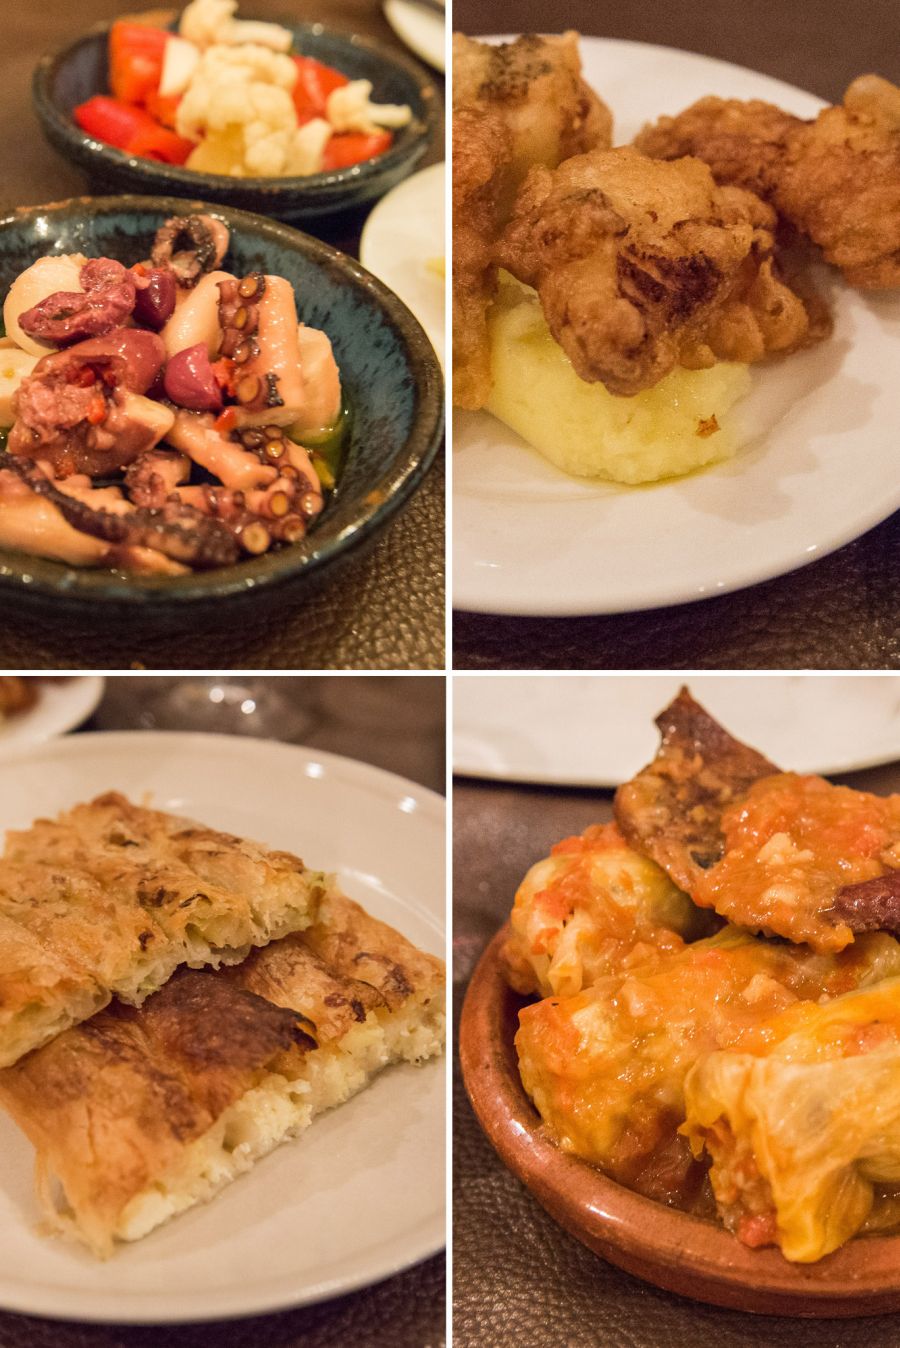 Clockwise from top left: salate od hobotnice (slow-cooked octopus, shallot, olive, EVOO); skordalia (shallow fried salt cod and garlicky potato puree); sarma (braised veal and pork, stuffed pickled cabbage, smoked bacon); guba so ciren (cheese and leek burek)